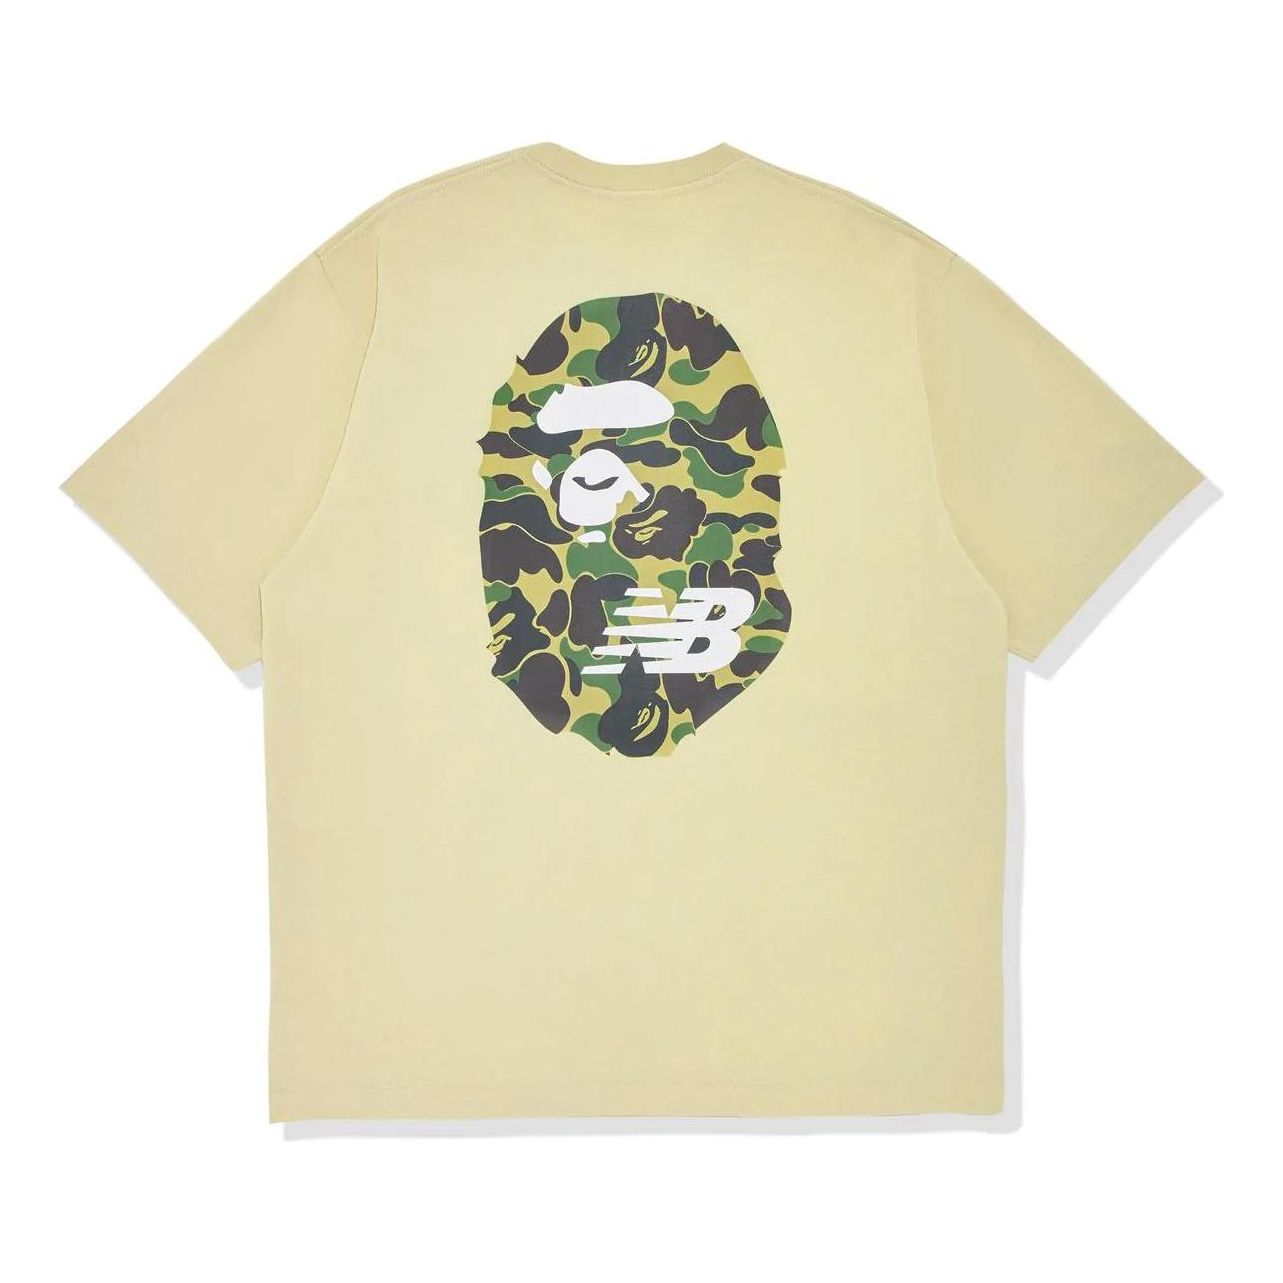 BAPE 1st Camo Relaxed Fit Layered L/S Tee Yellow